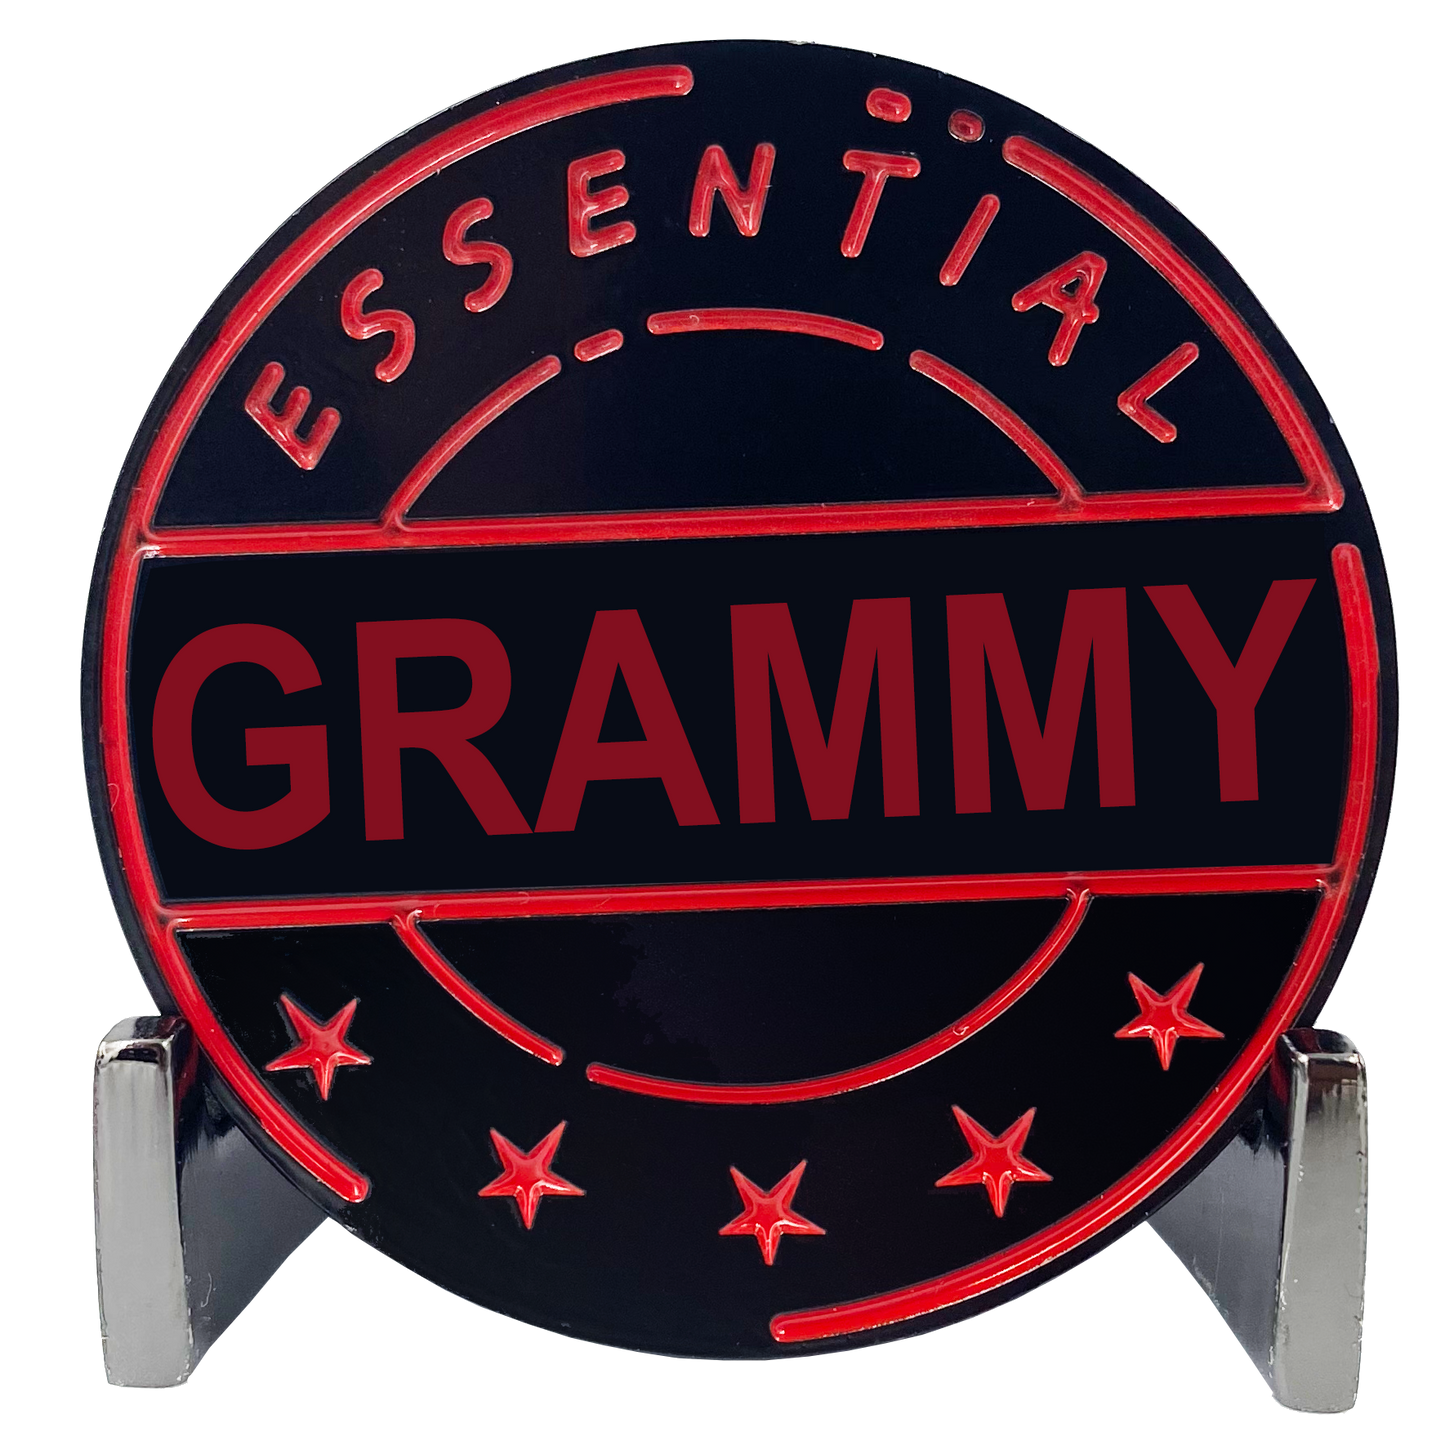 CL8-17 Essential Workers Grammy Challenge Coin perfect for Mother's Day or Grandma's Birthday